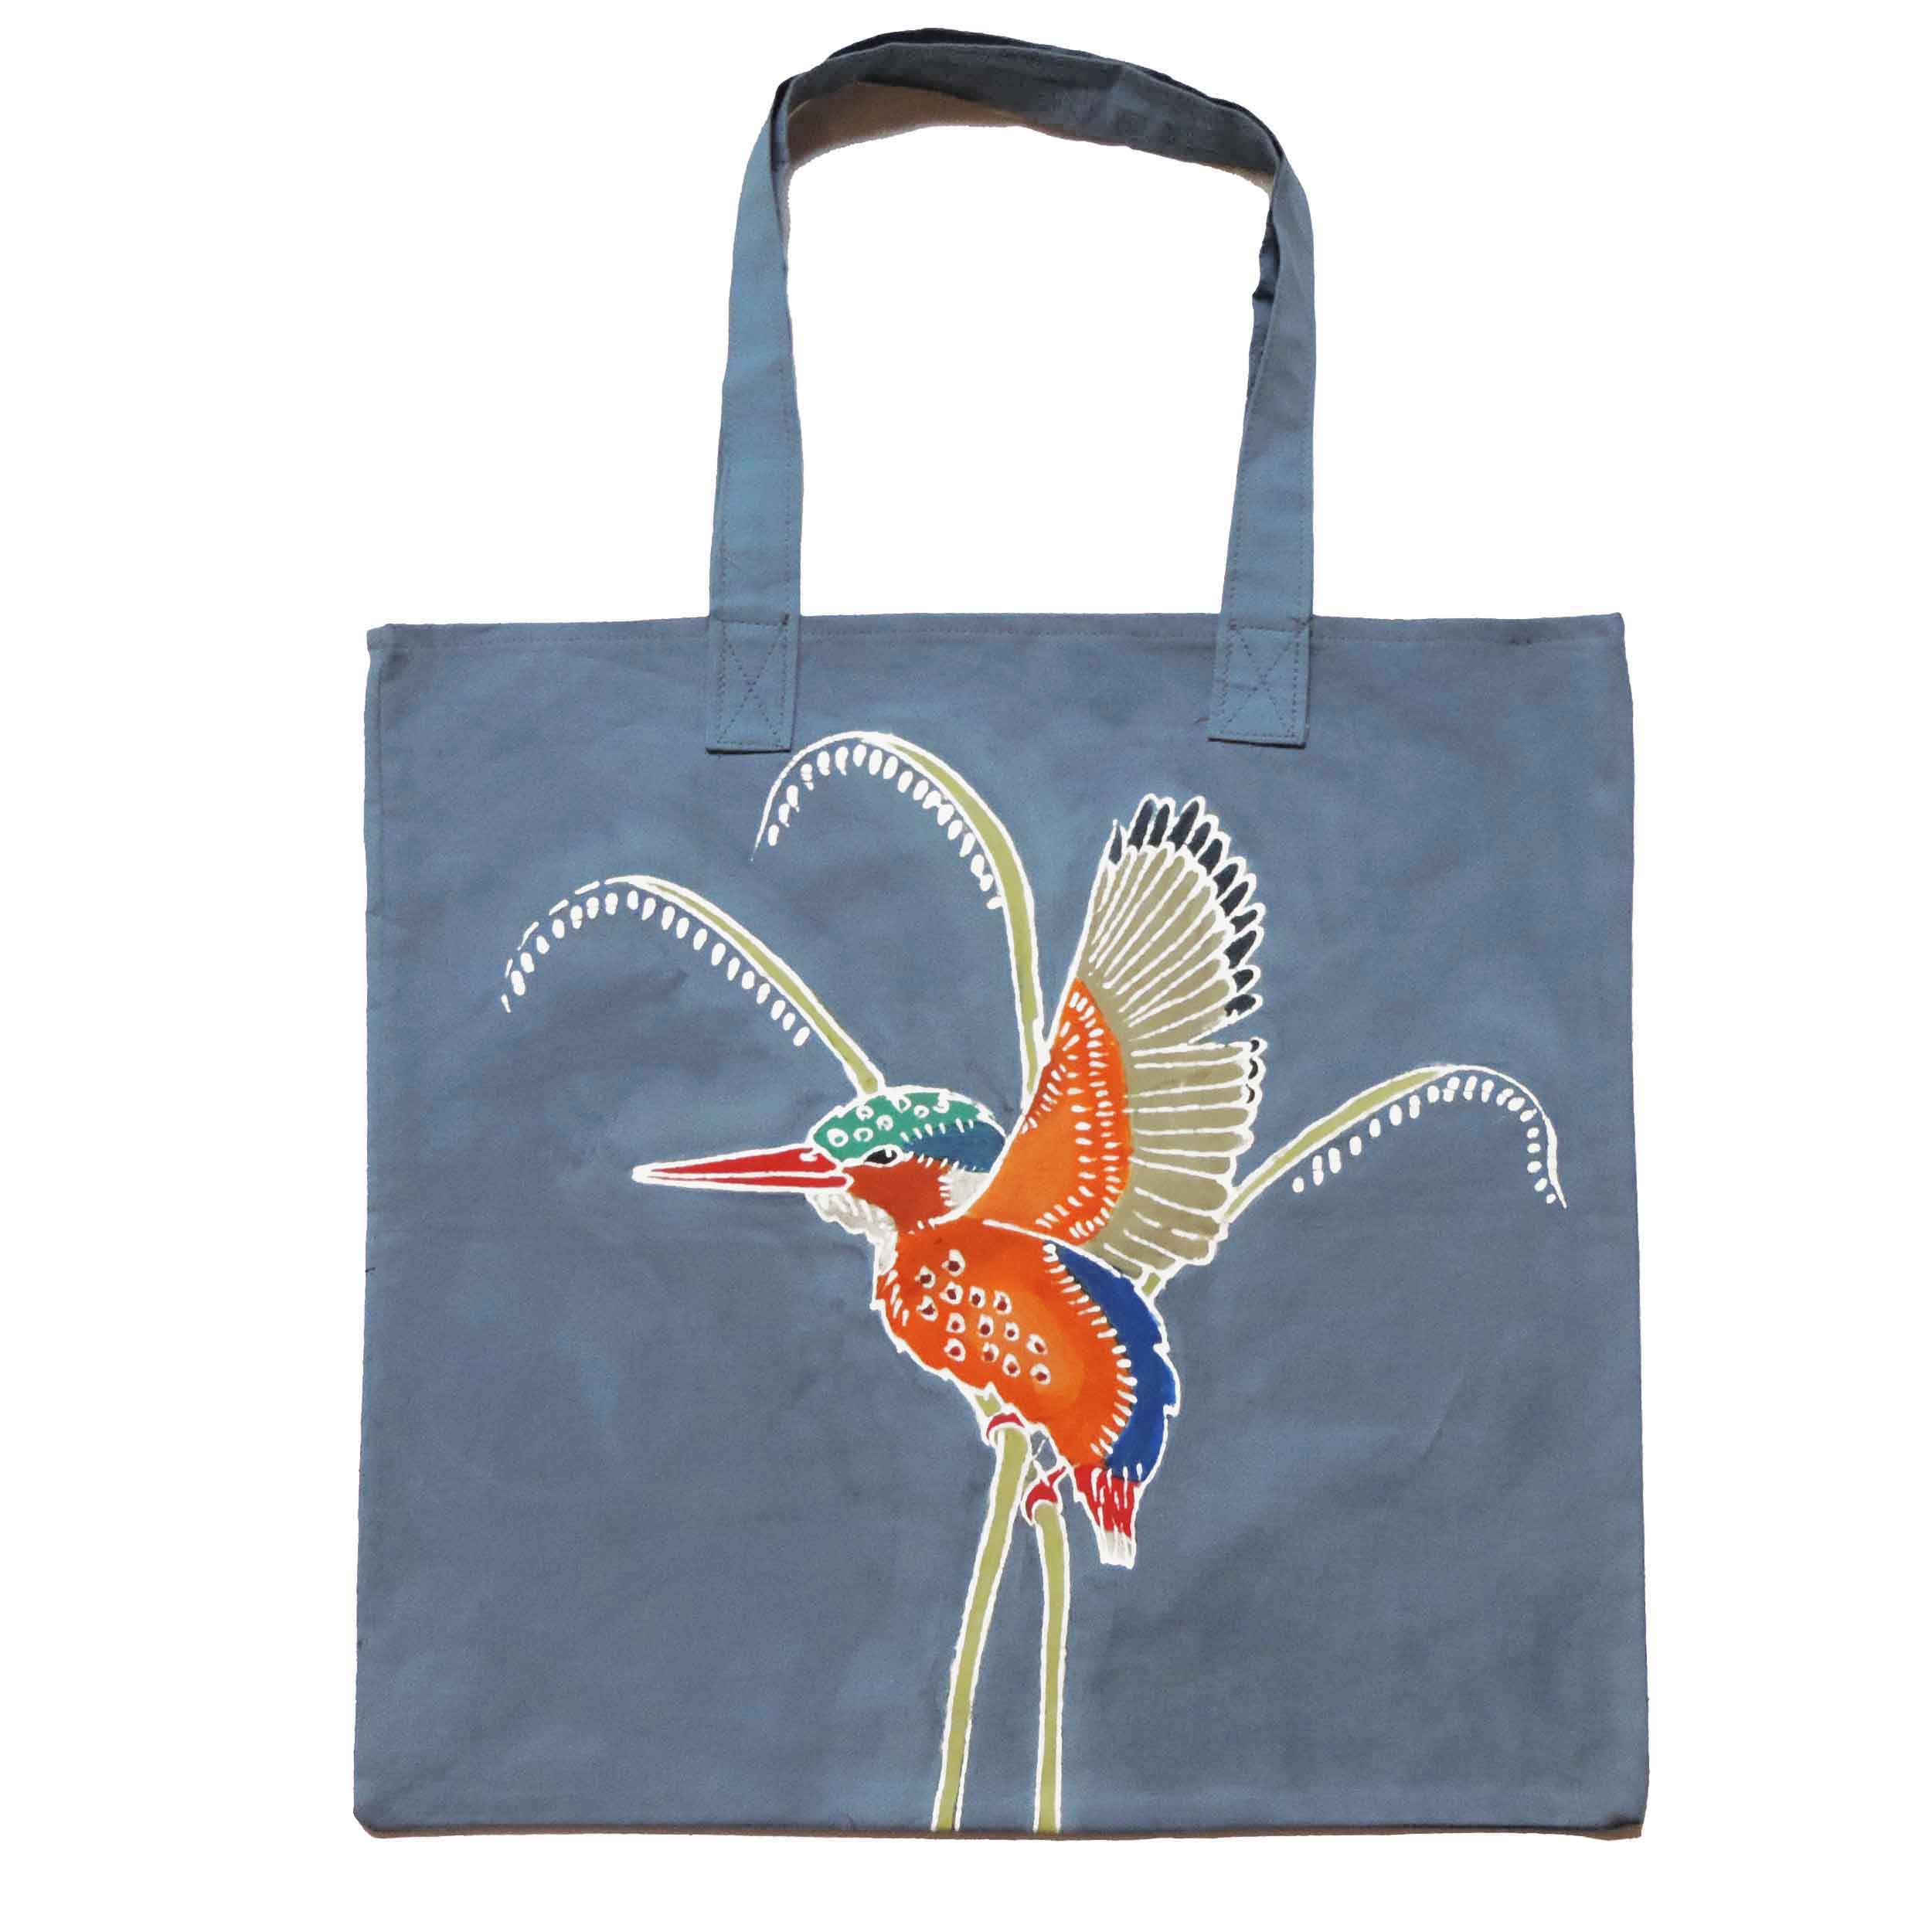 Papiko Malachite Kingfisher Tote Bag - Handmade by TRIBAL TEXTILES - Handcrafted Home Decor Interiors - African Made